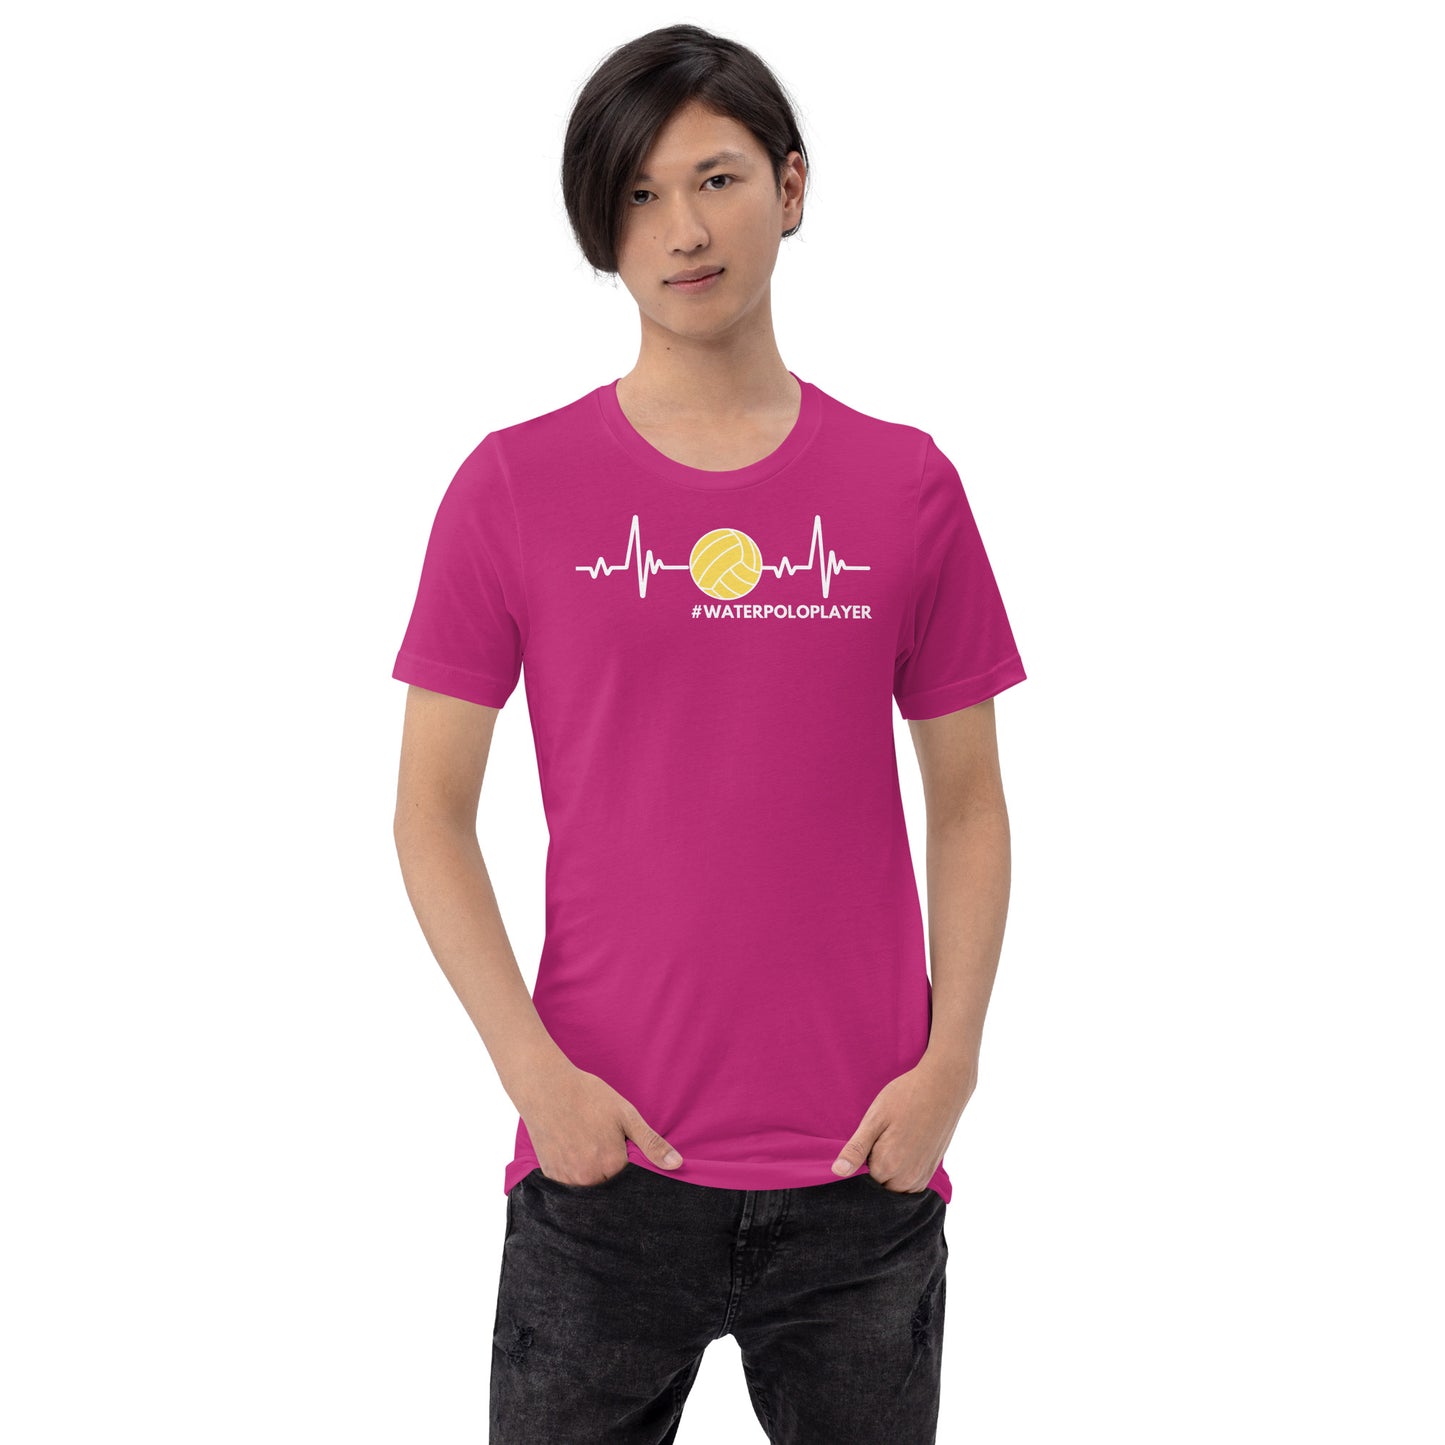 Waterpolo Player Heartbeat - Unisex Soft T-shirt - Bella Canvas 3001